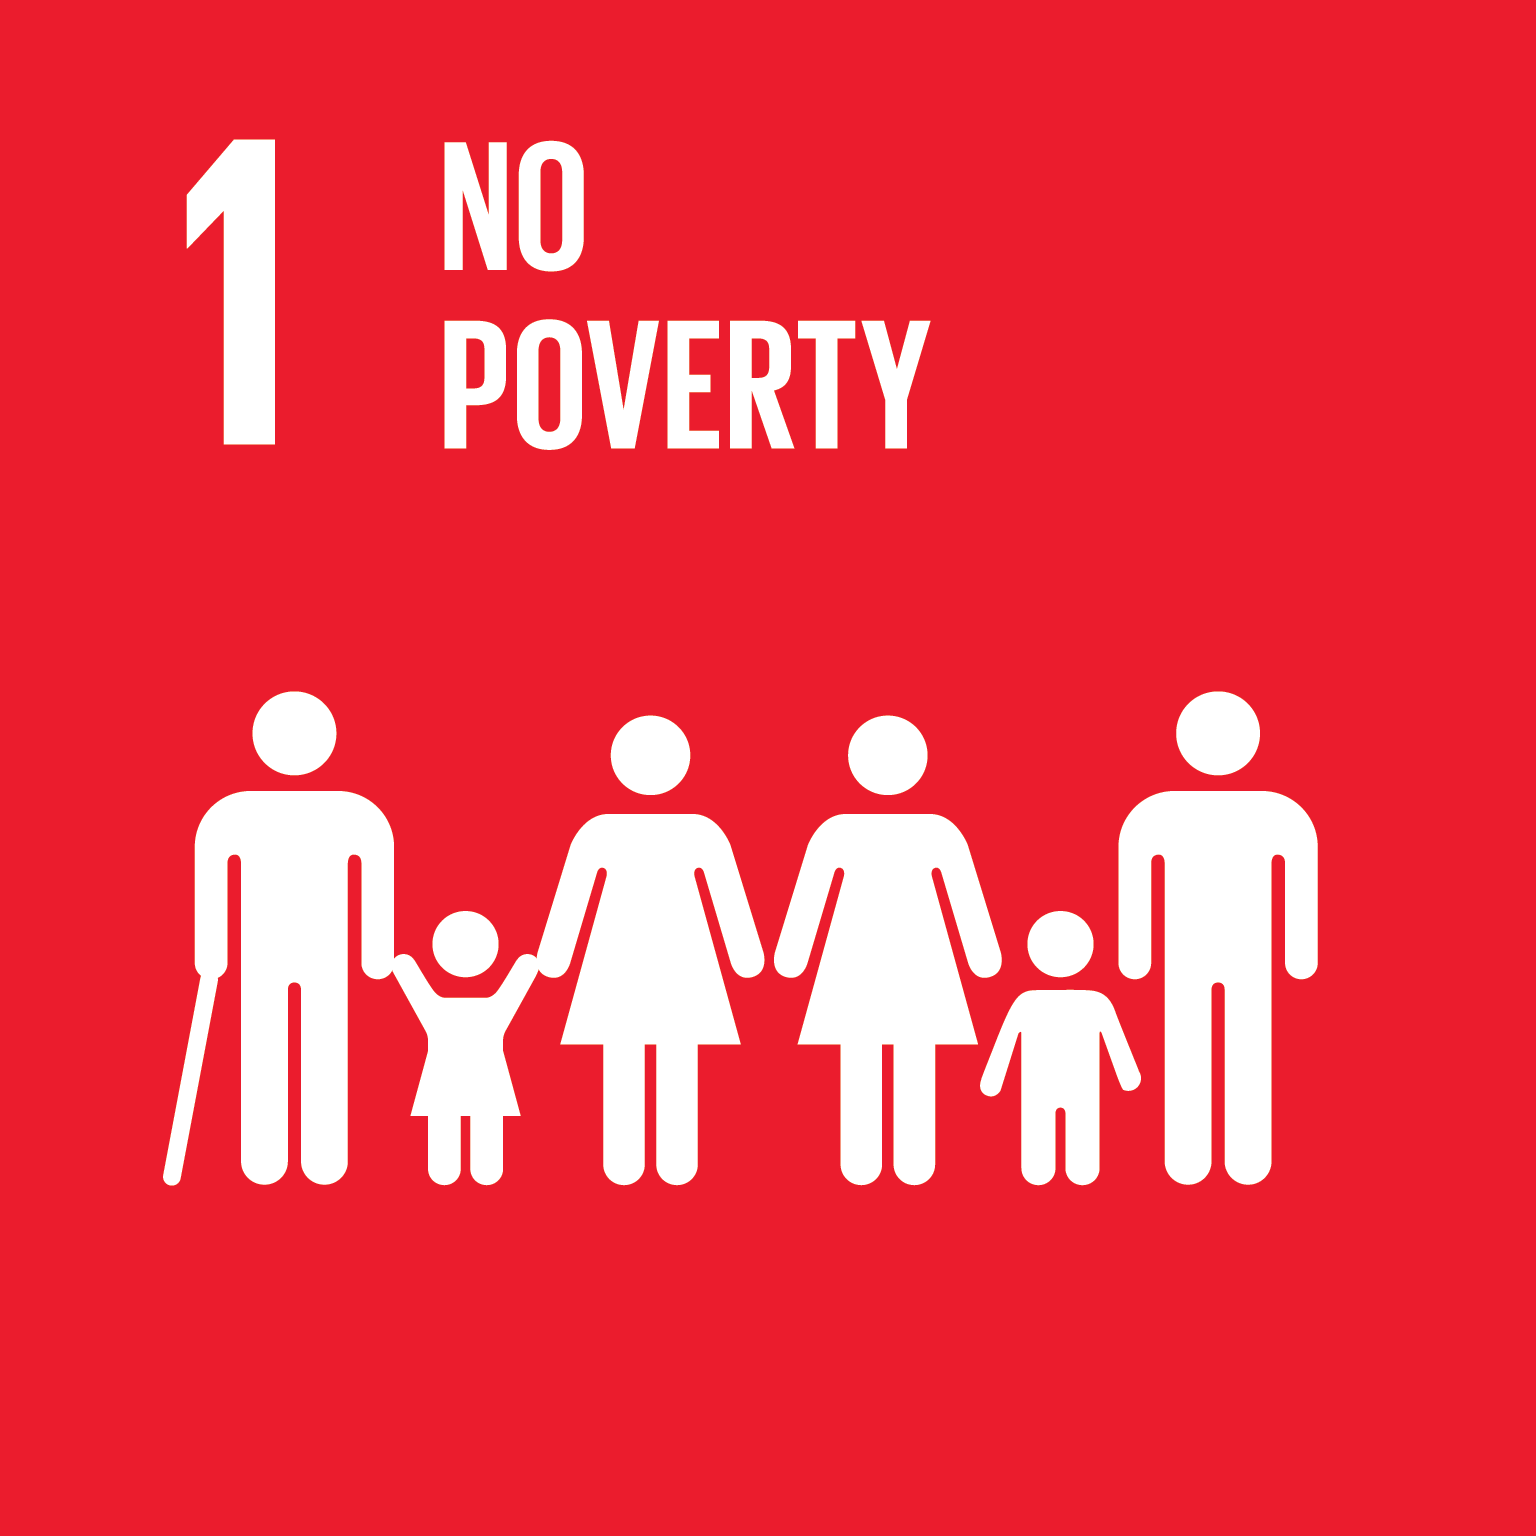 1. End Poverty